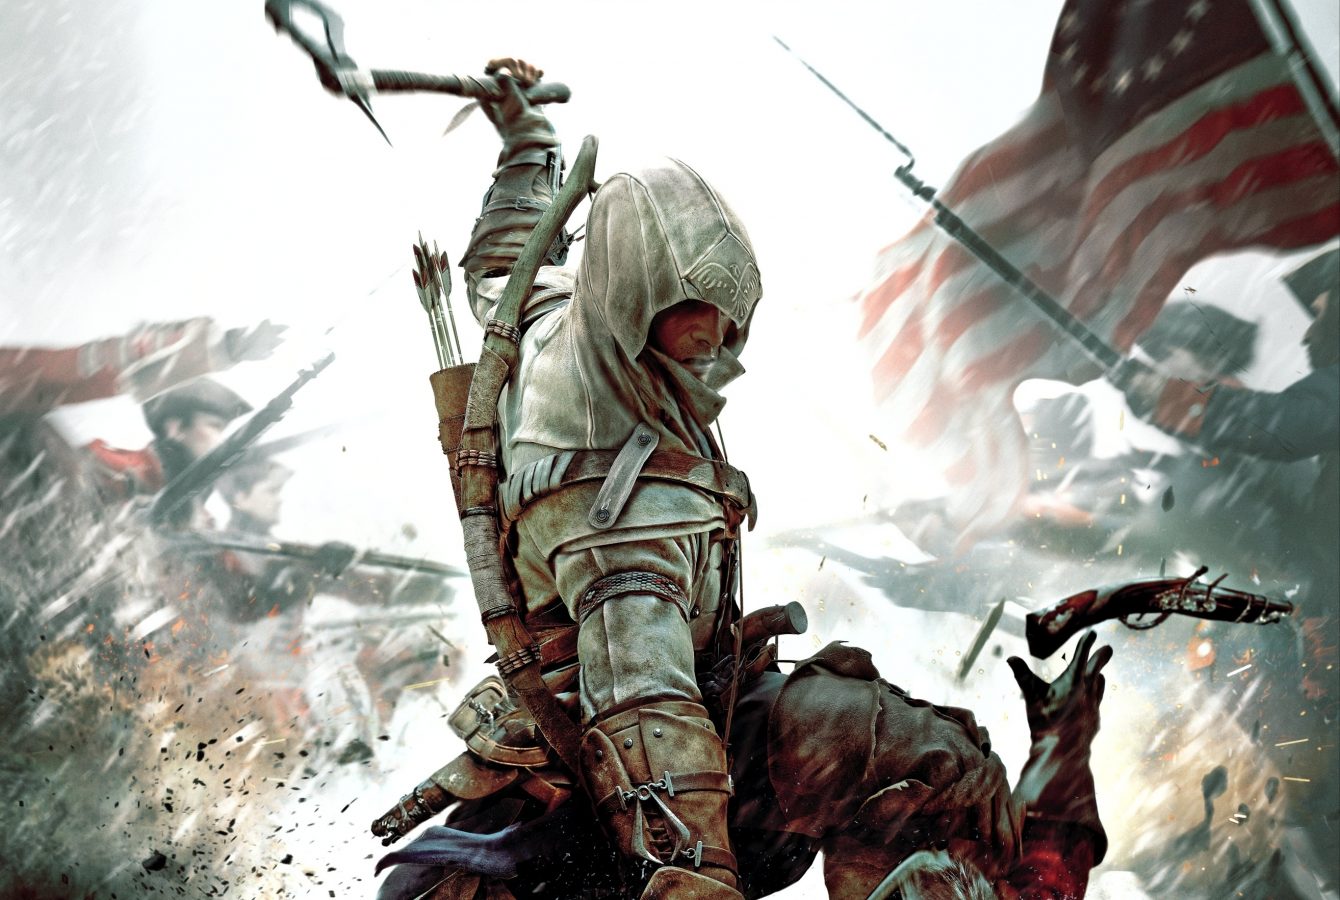 Ubisoft removes mention of Assassin’s Creed III Remastered from their website